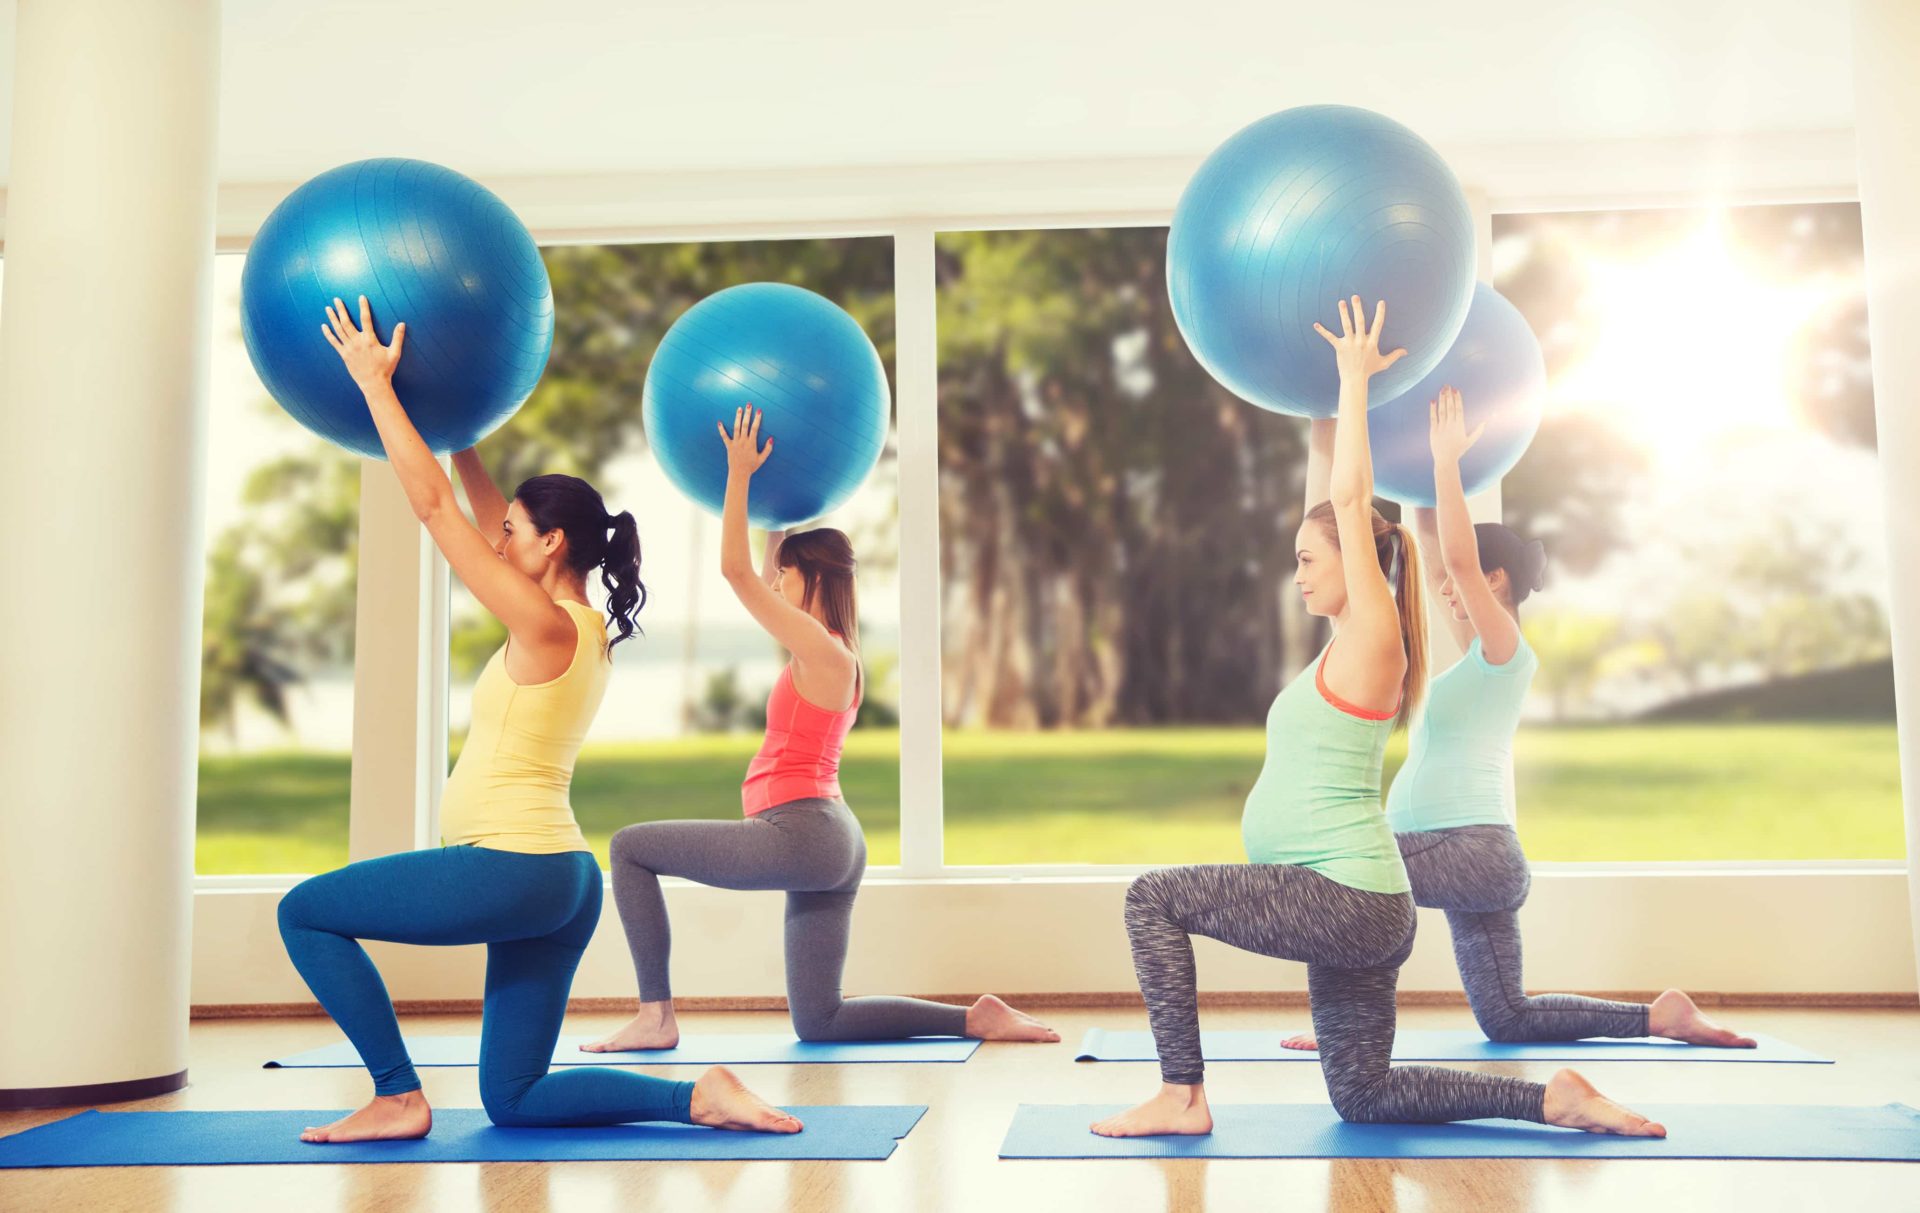 pregnancy, sport, fitness, people and healthy lifestyle concept - group of happy pregnant women exercising with ball in gym over natural window view background